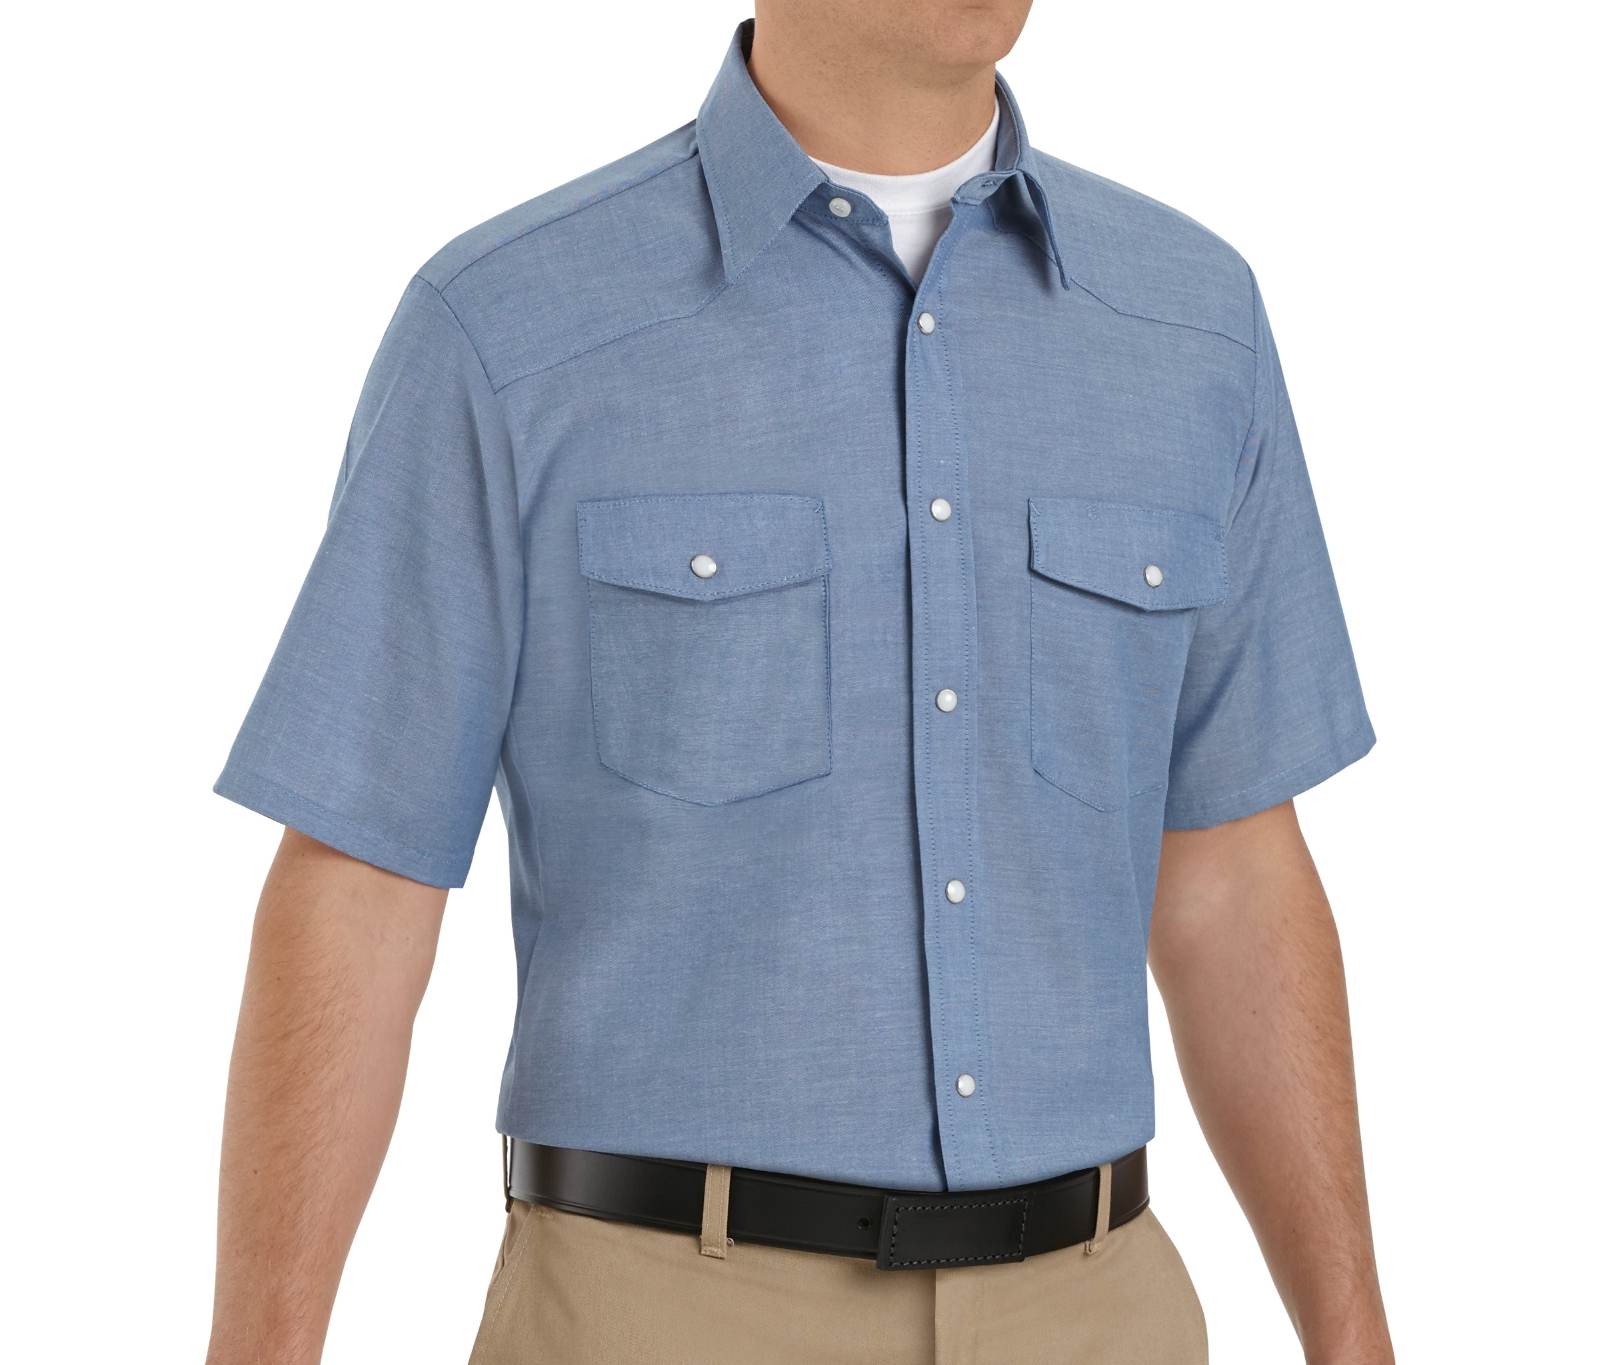 Red Kap Men's Short Sleeve Deluxe Western Style Shirt - image 1 of 2